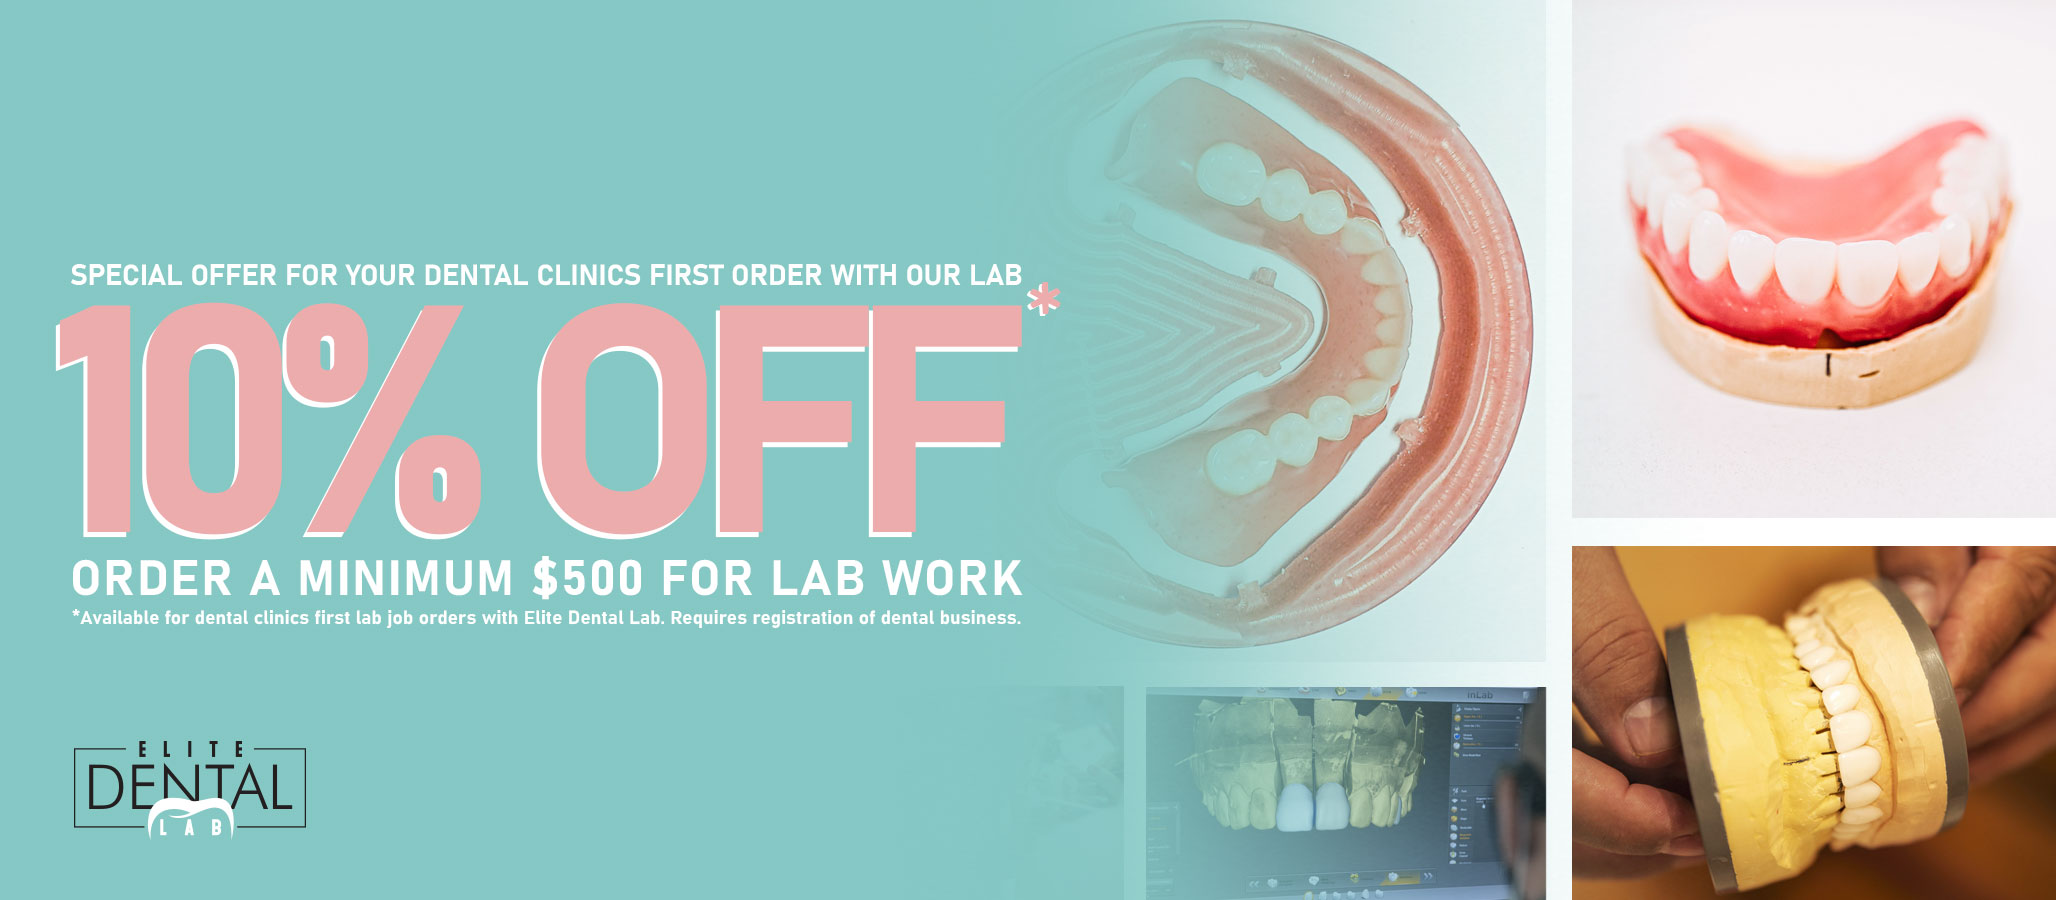 Special Offer for Dental Clinics first lab work orders with Elite Dental Lab